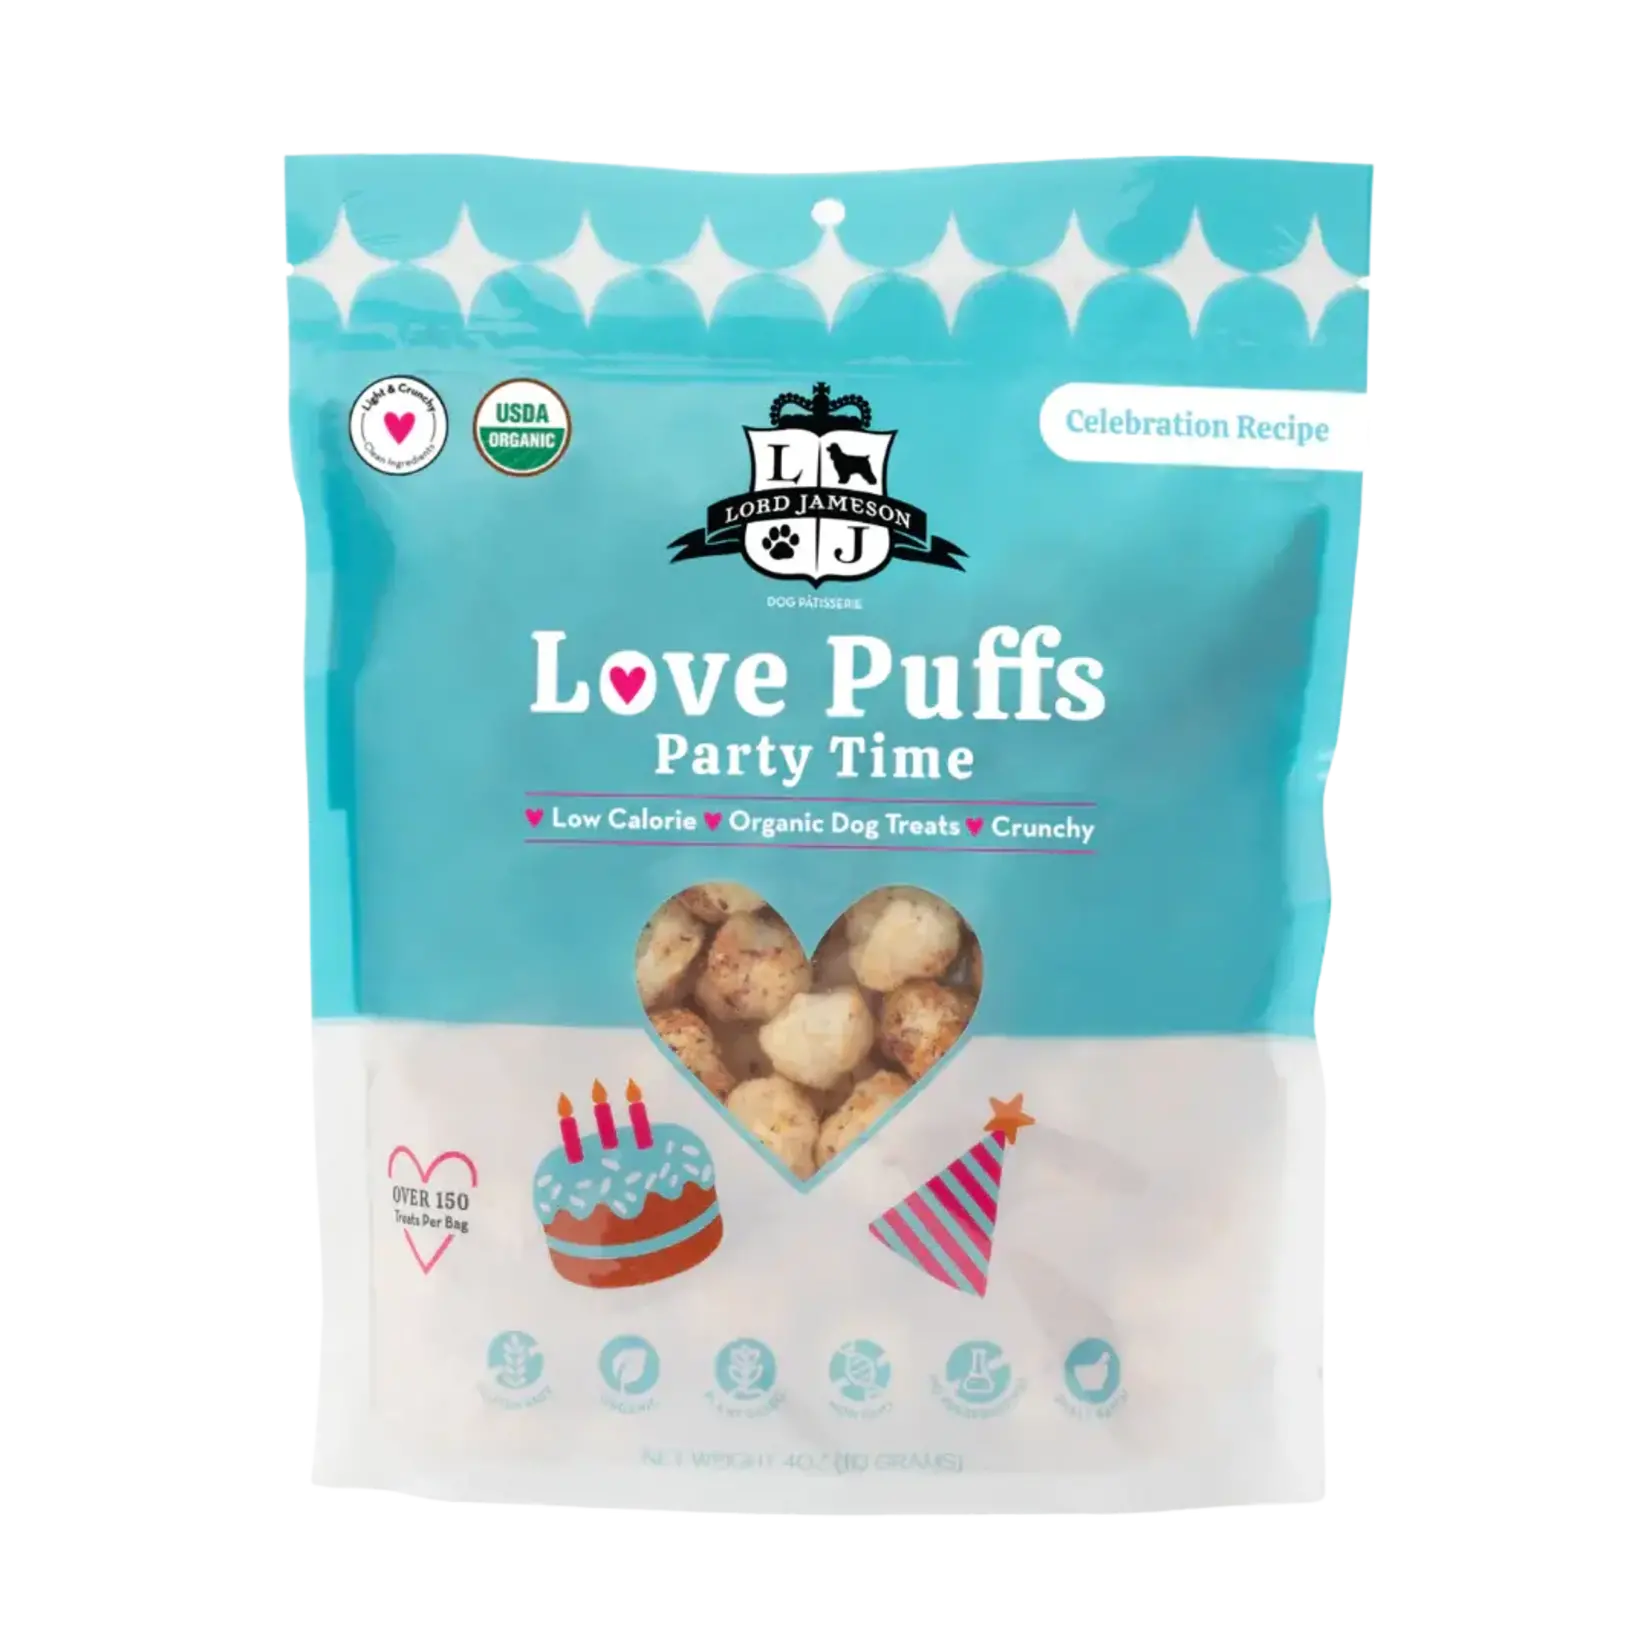 Lord Jameson Lord Jameson D Love Puffs Party Time 4 oz